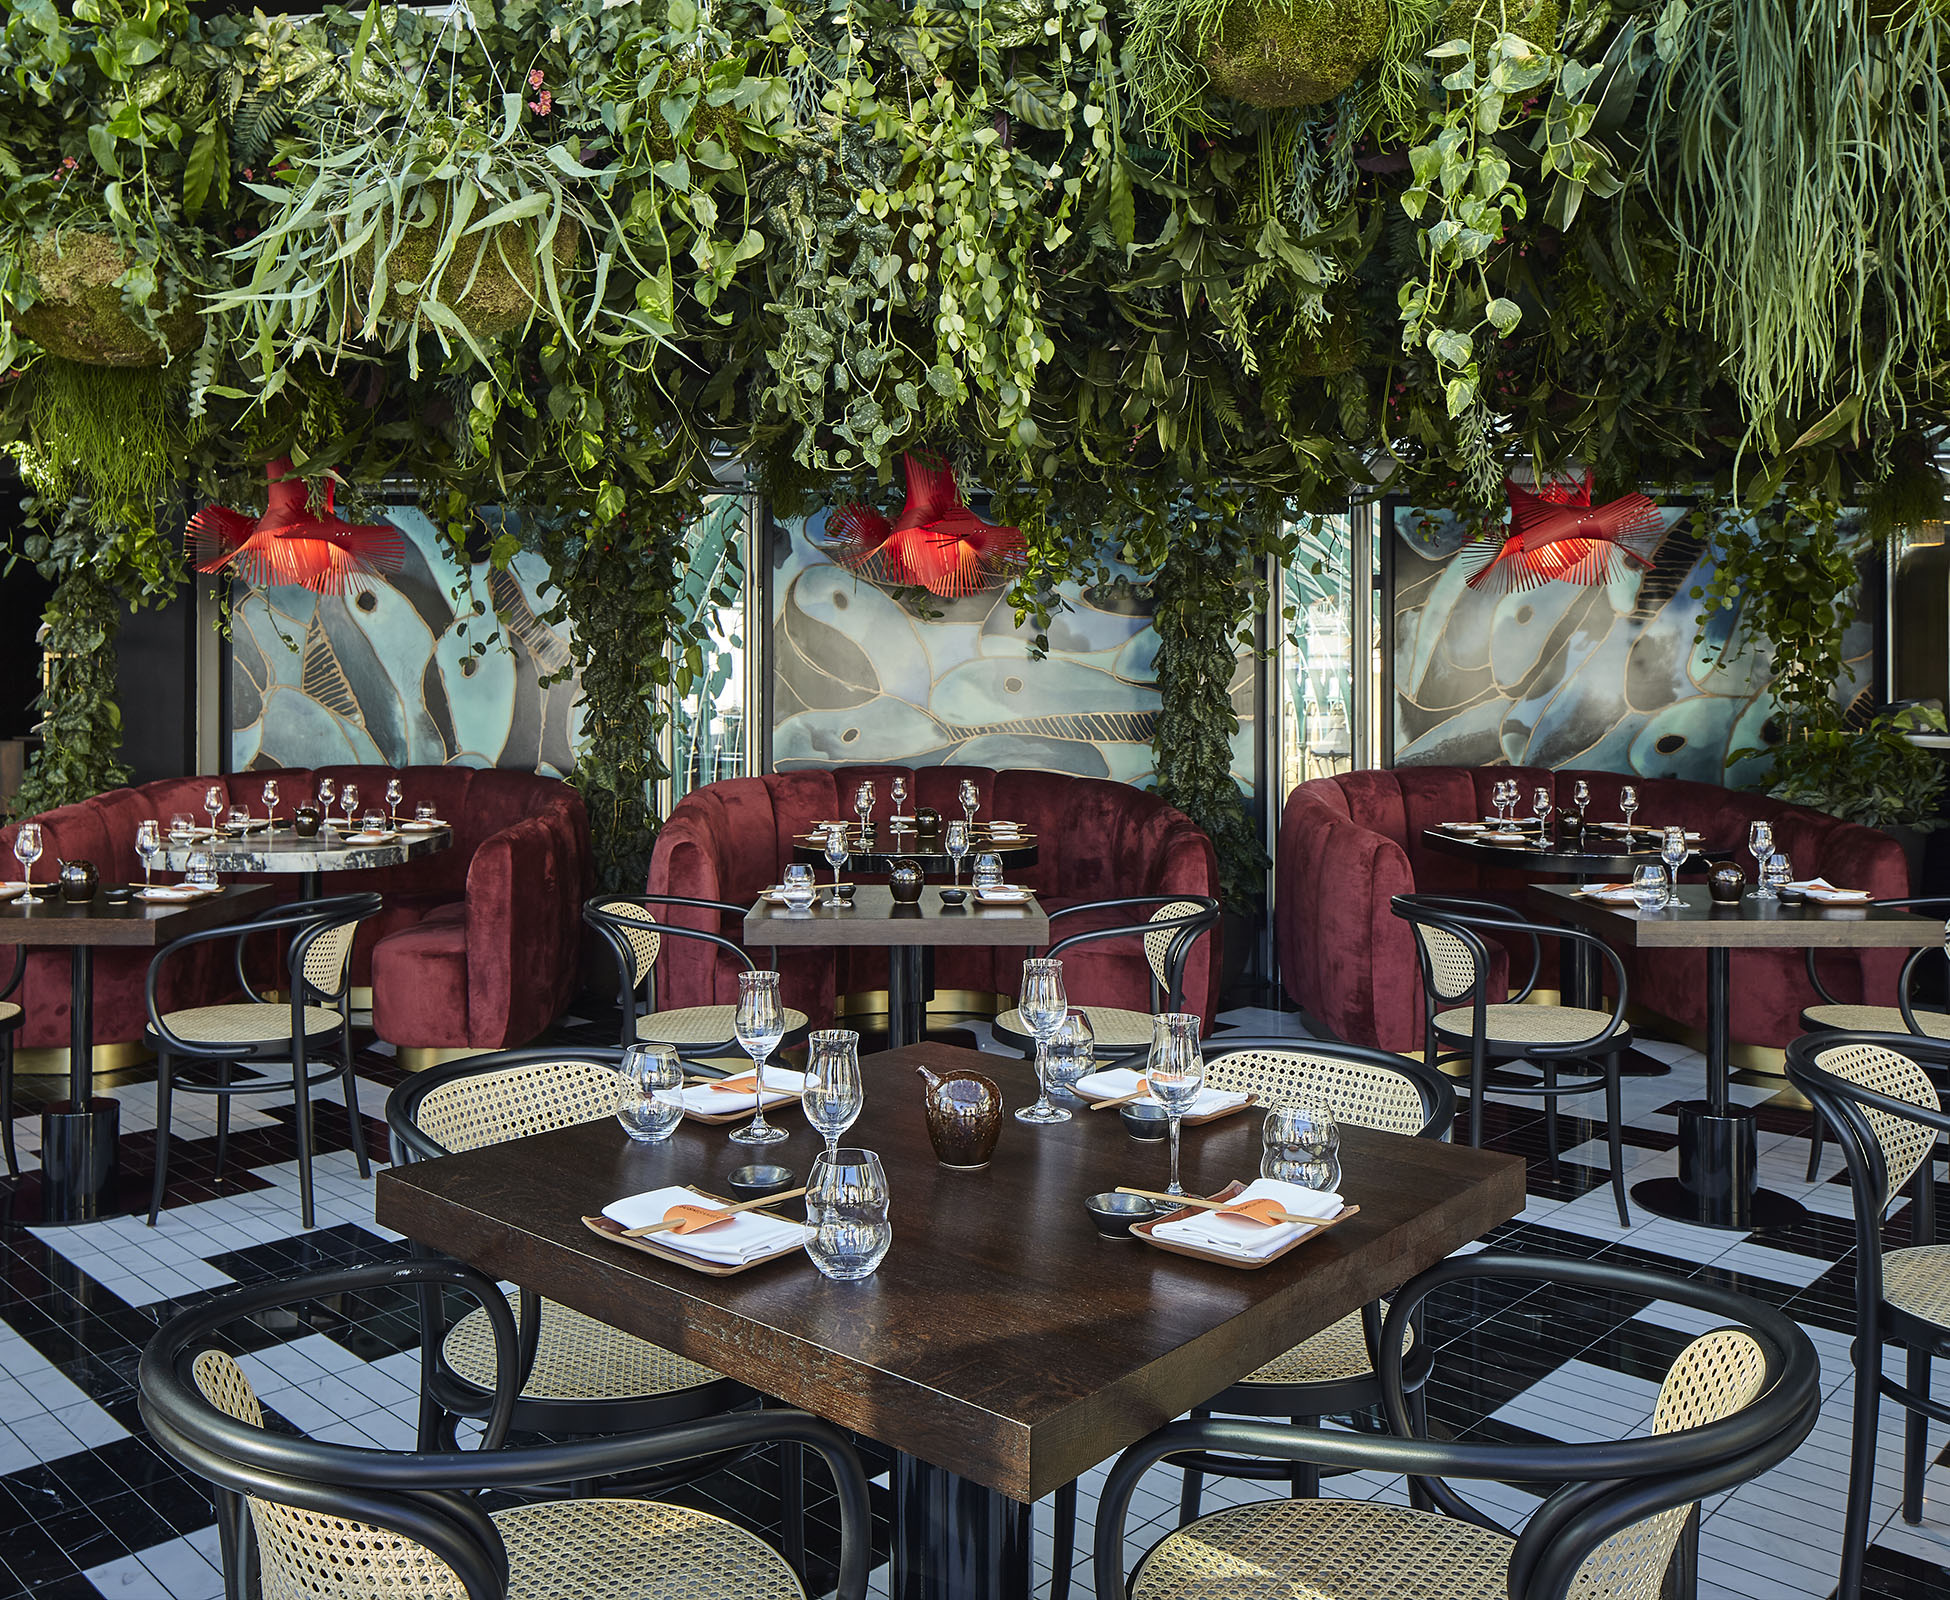 Cascading plants envelop the customer in the lush green atmosphere. Tall climbers are trained up and across the restaurant framework, merging into the ‘Living Ceiling’.